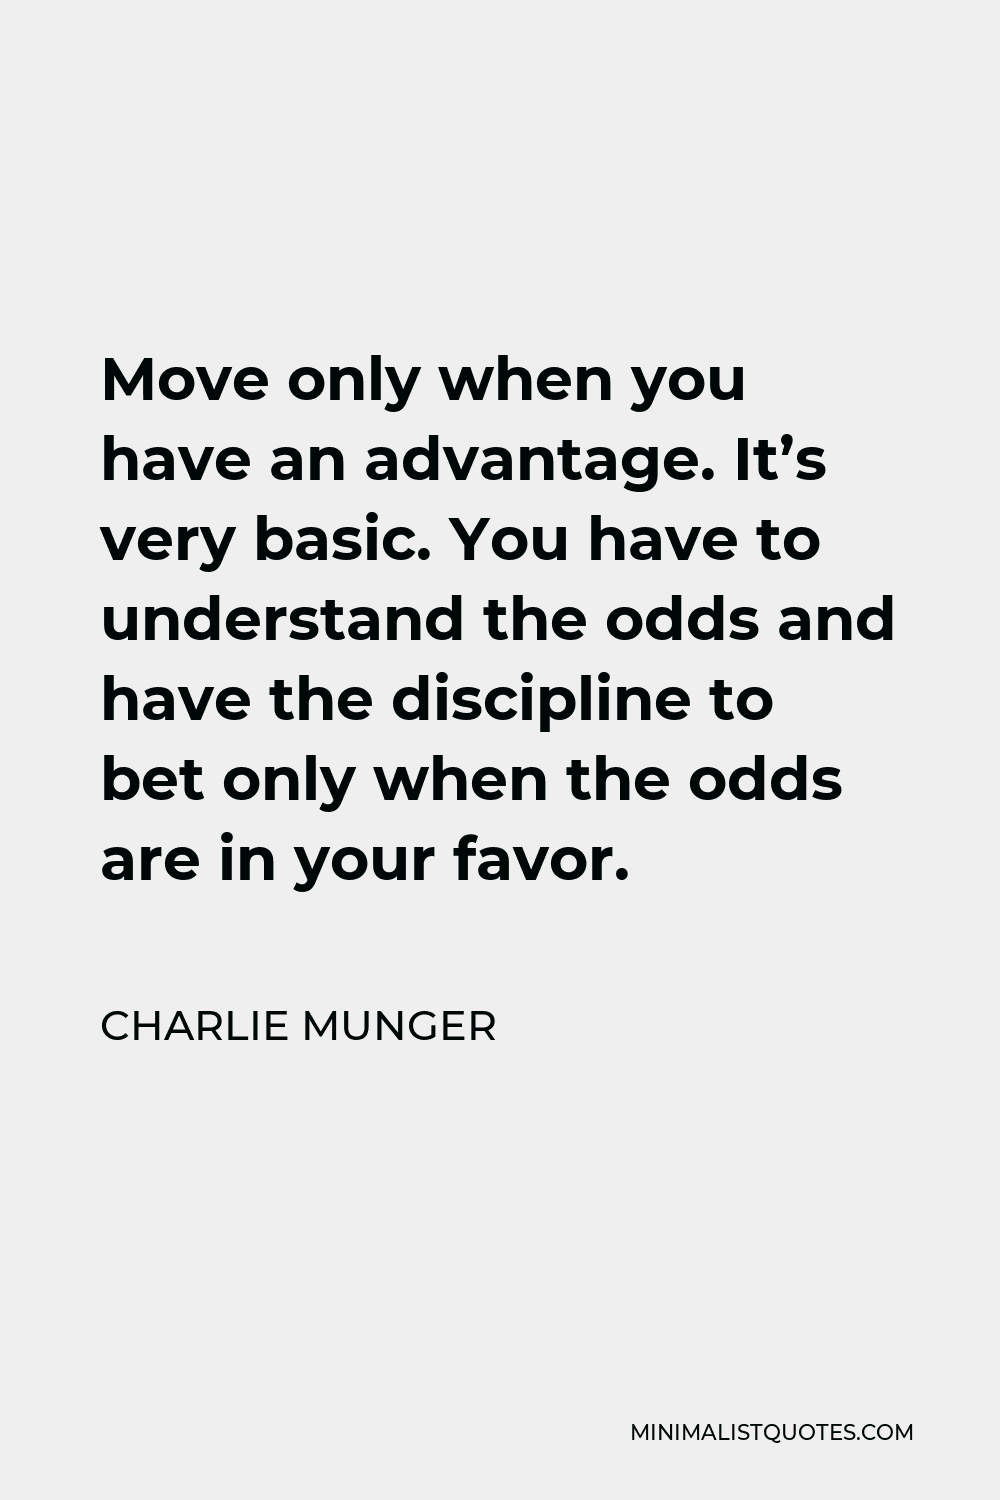 Charlie Munger Quote - Move only when you have an advantage. It’s very basic. You have to understand the odds and have the discipline to bet only when the odds are in your favor.